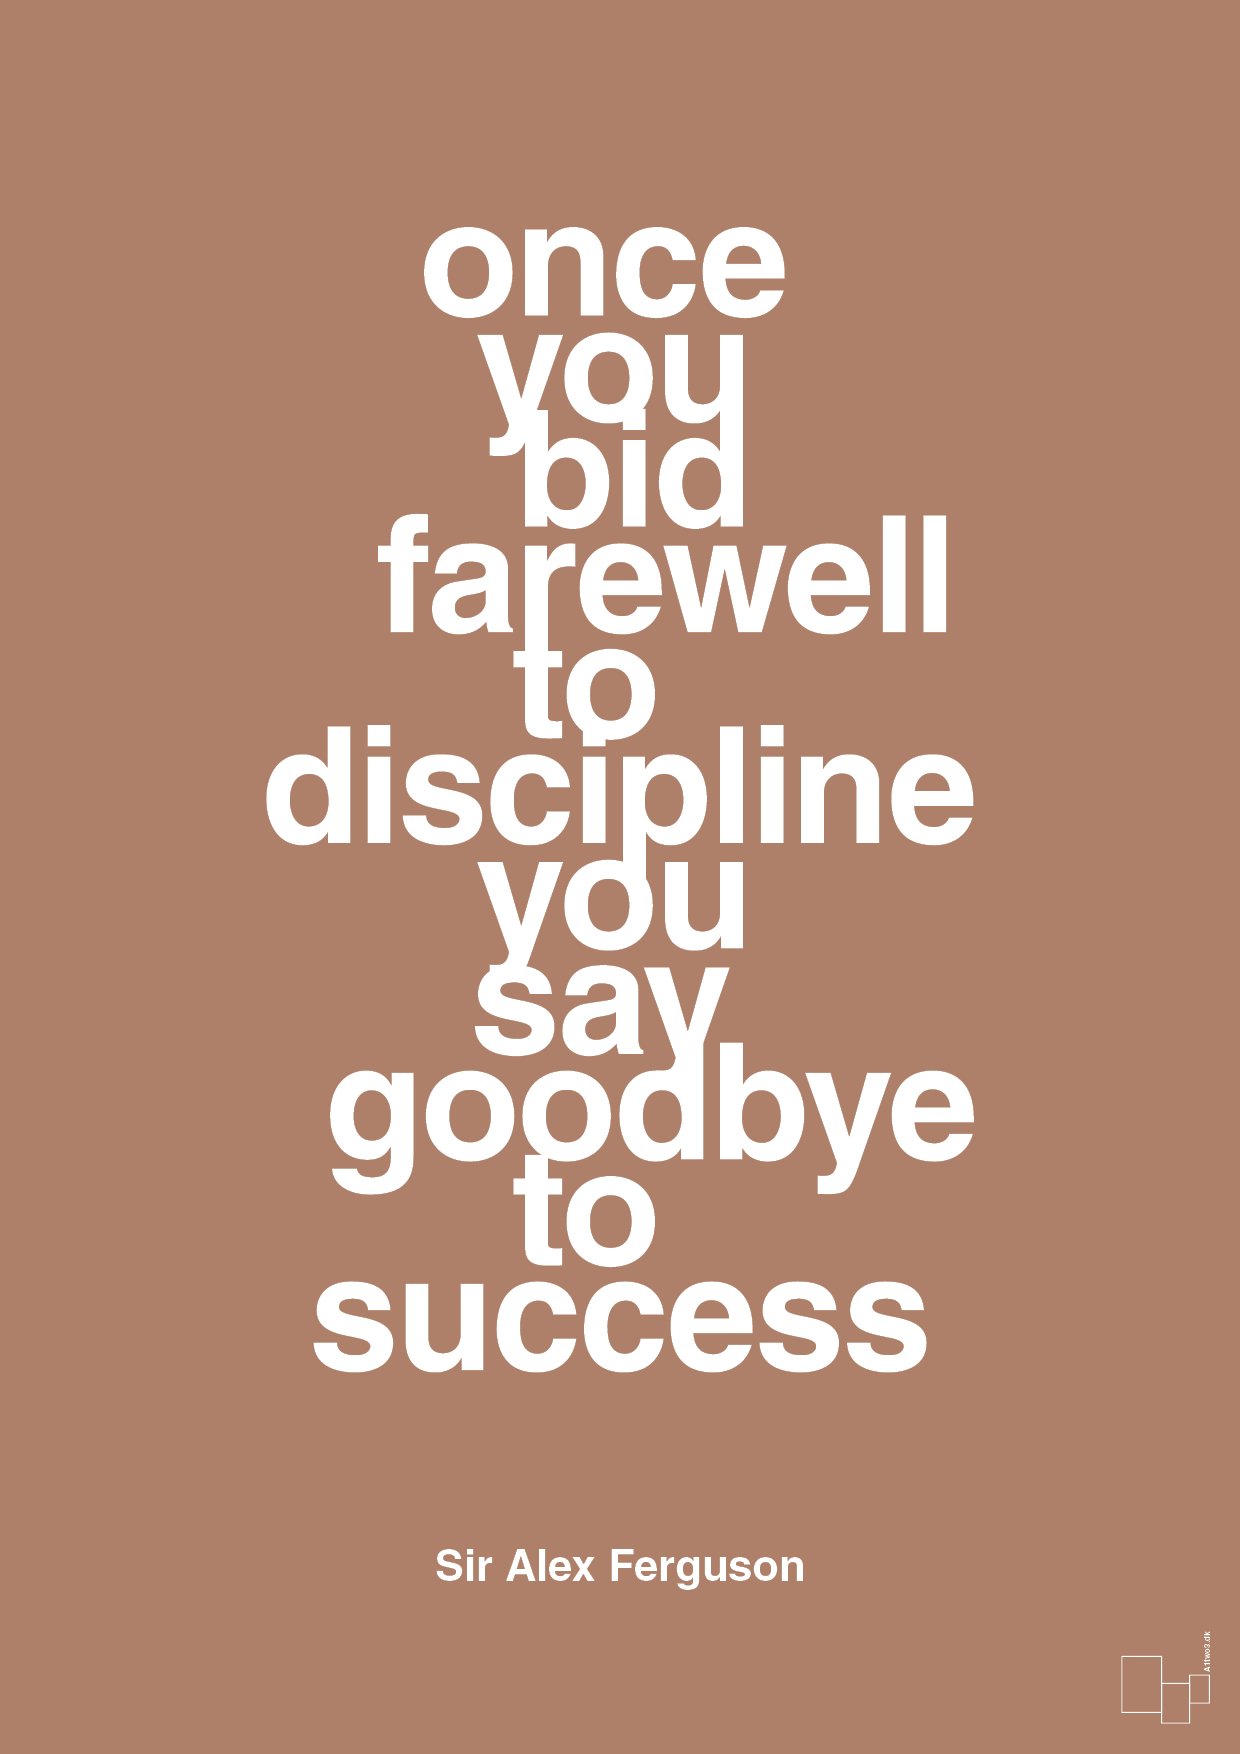 once you bid farewell to discipline you say goodbye to success - Plakat med Citater i Cider Spice